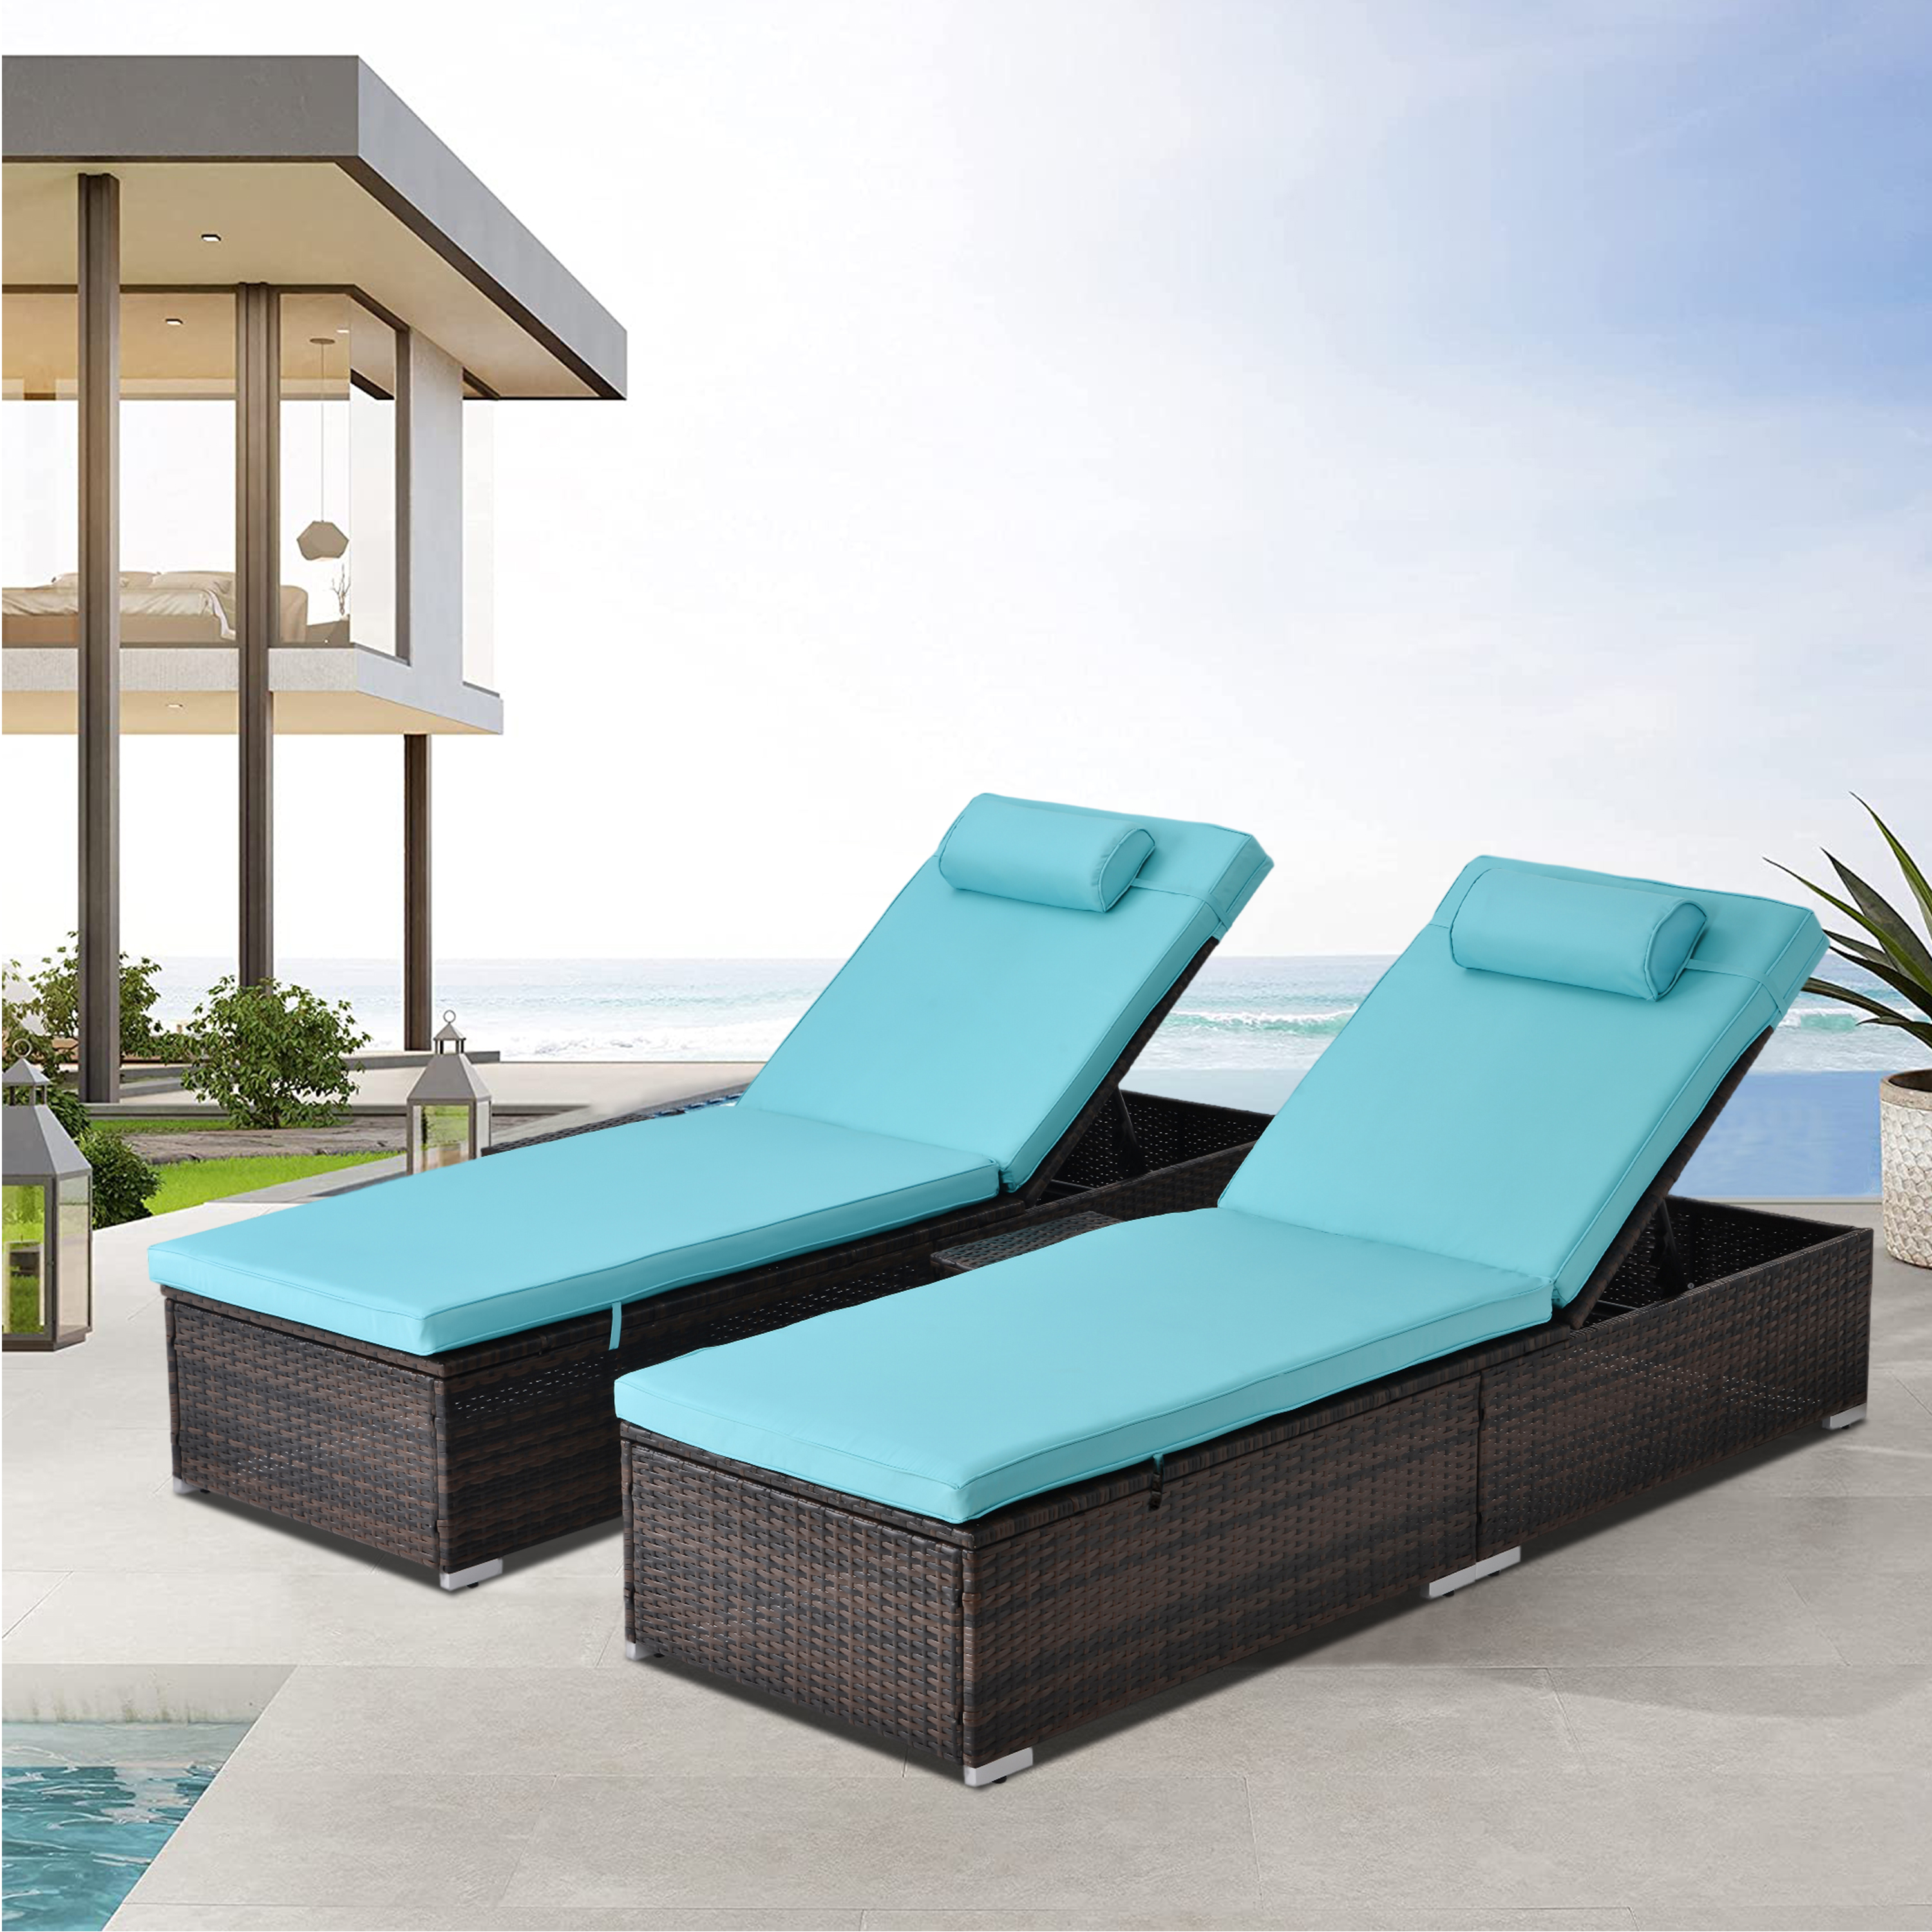 2 Pieces Outdoor Patio Lounge Furniture Set, Poolside Reclining PE Rattan Chaise Recliners with Side Table, Tempered Glass Top Coffee Table, Brown PE Wicker and Blue Cushions, SS2341 - image 1 of 8